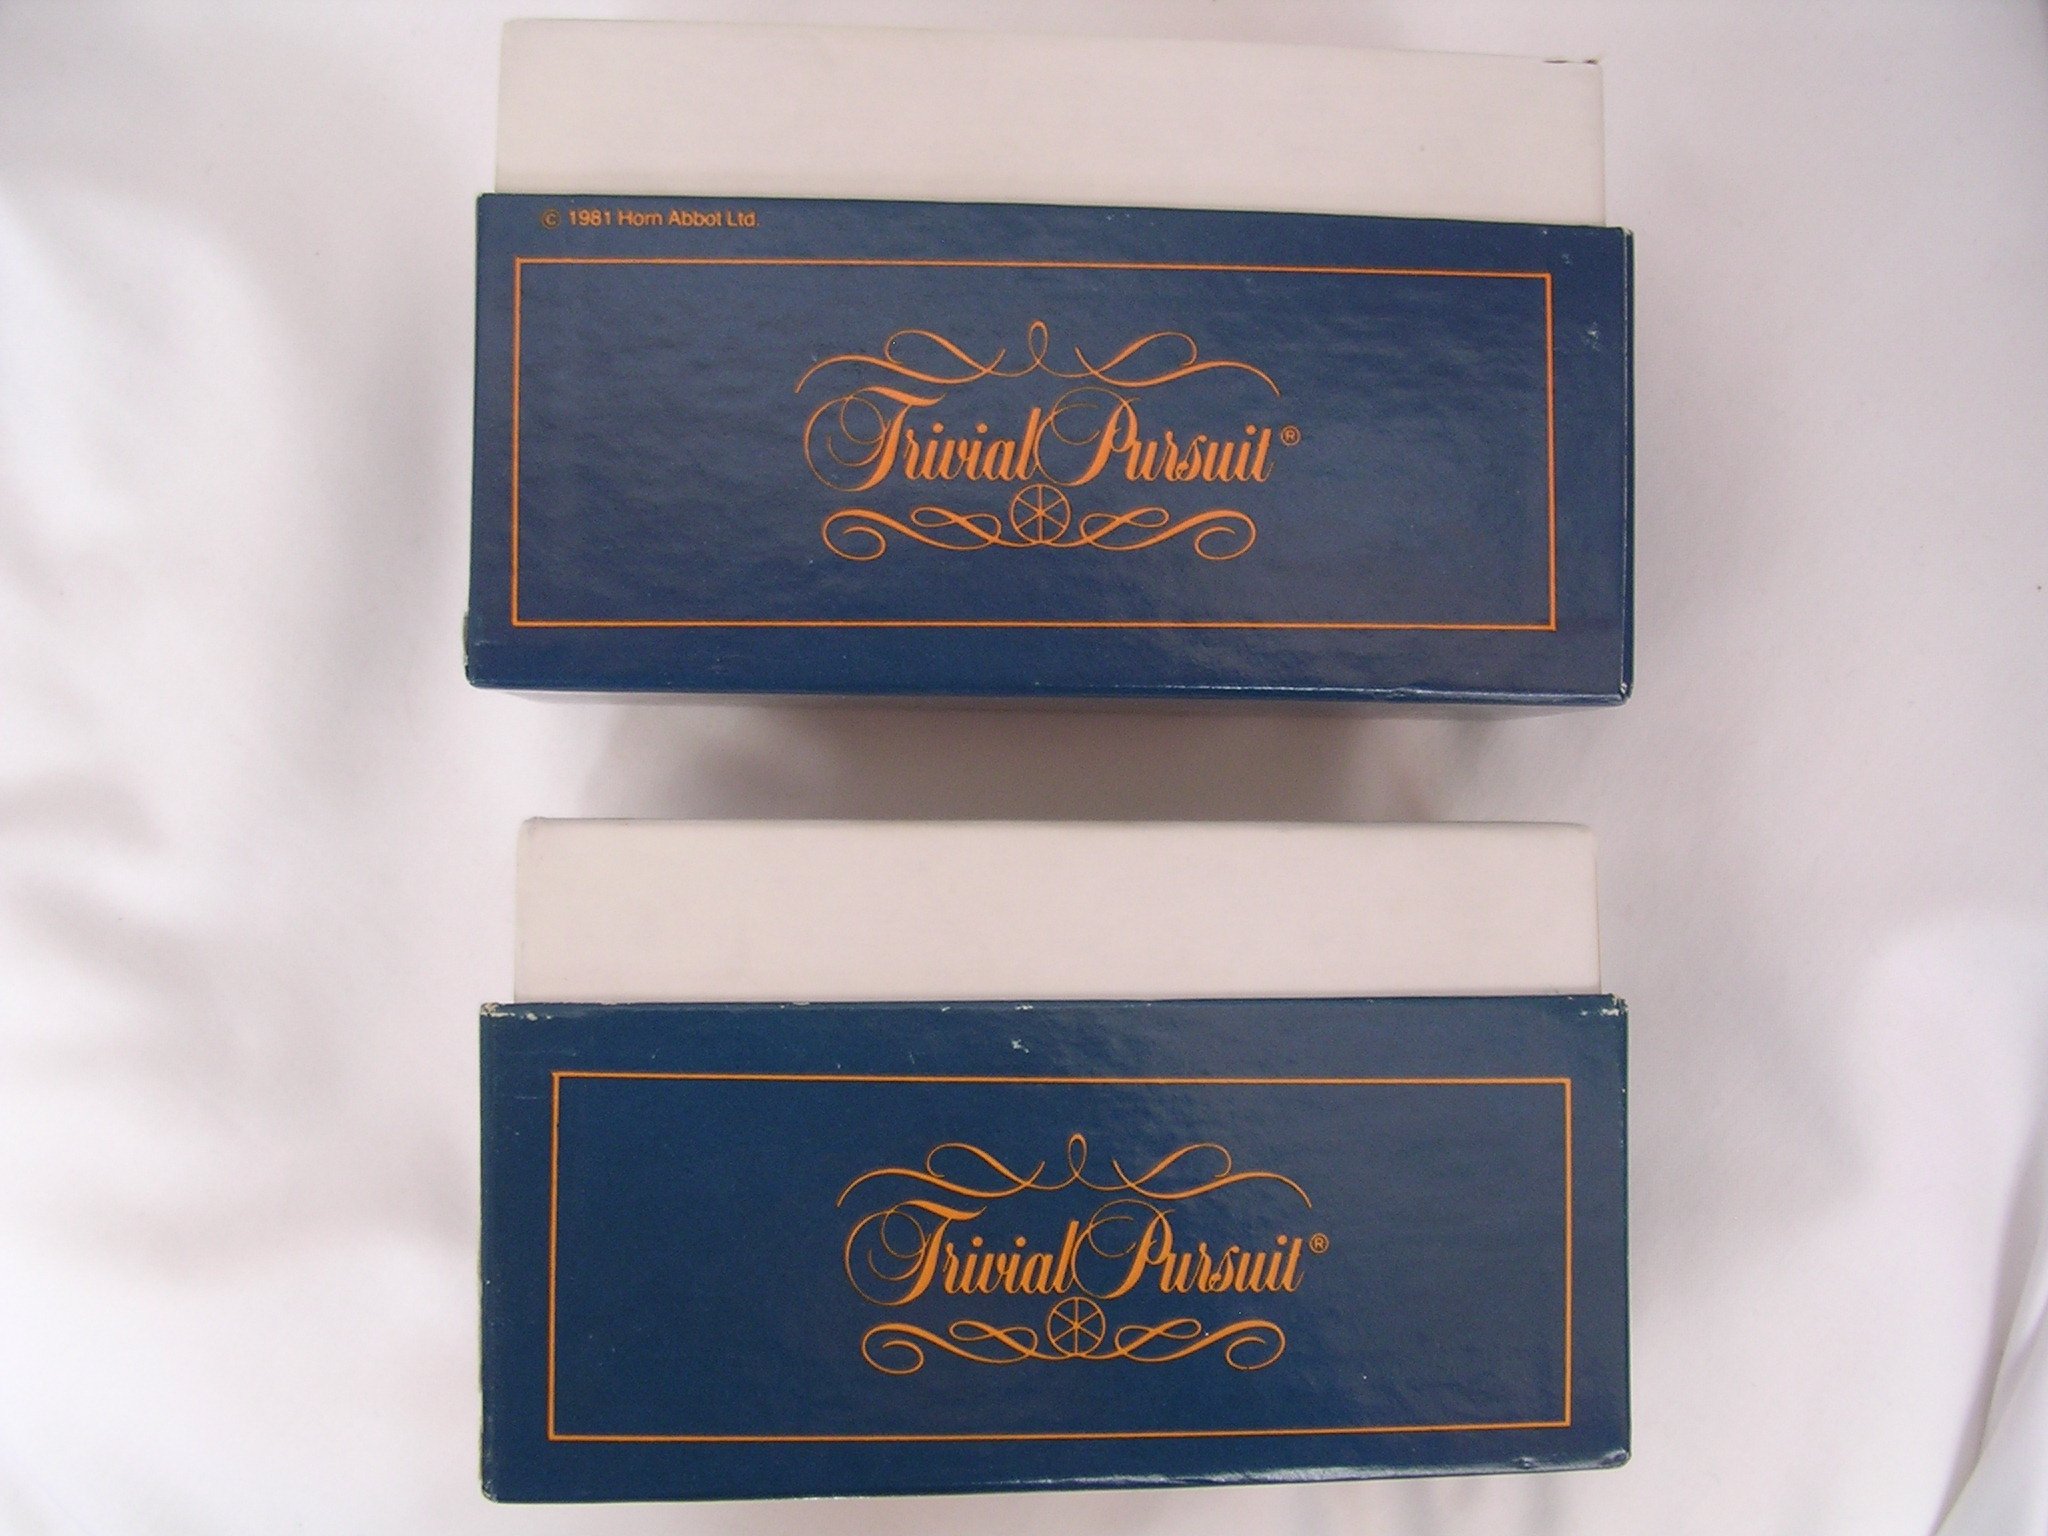 Trivial Pursuit Subsidiary Card Set ; 2 Boxes from The Original Master Game